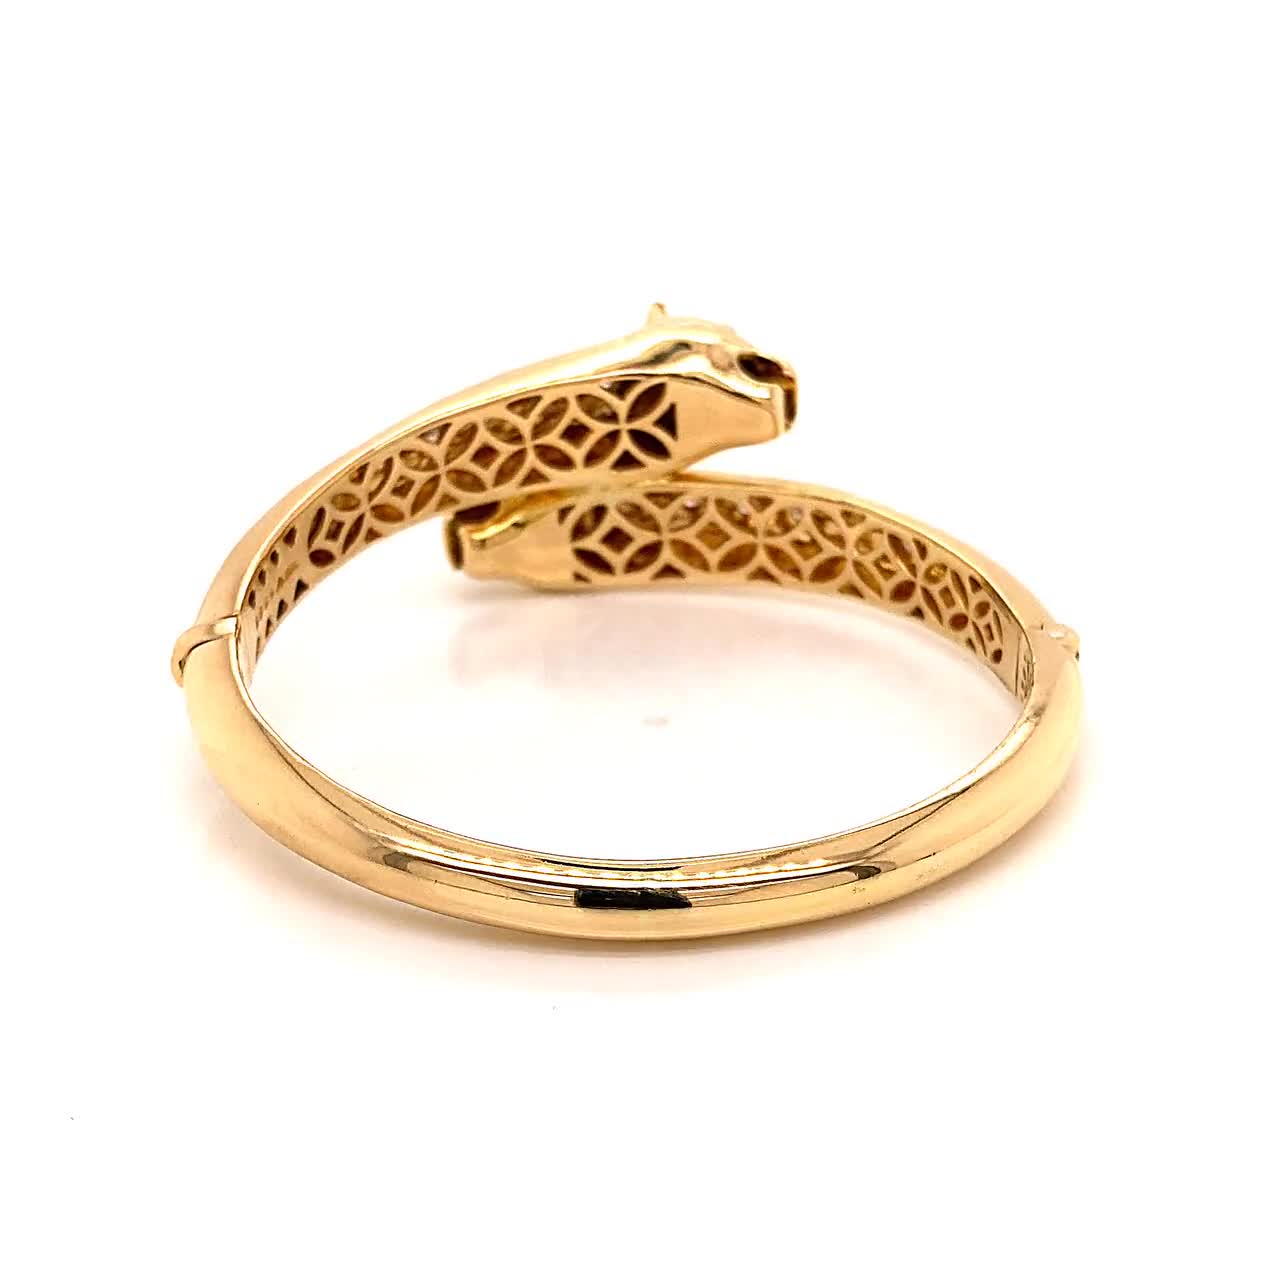 Very Classy Looking Jaguar with Diamond in Stainless Steel Gold Plated  Bracelet - Style A942 – Soni Fashion®